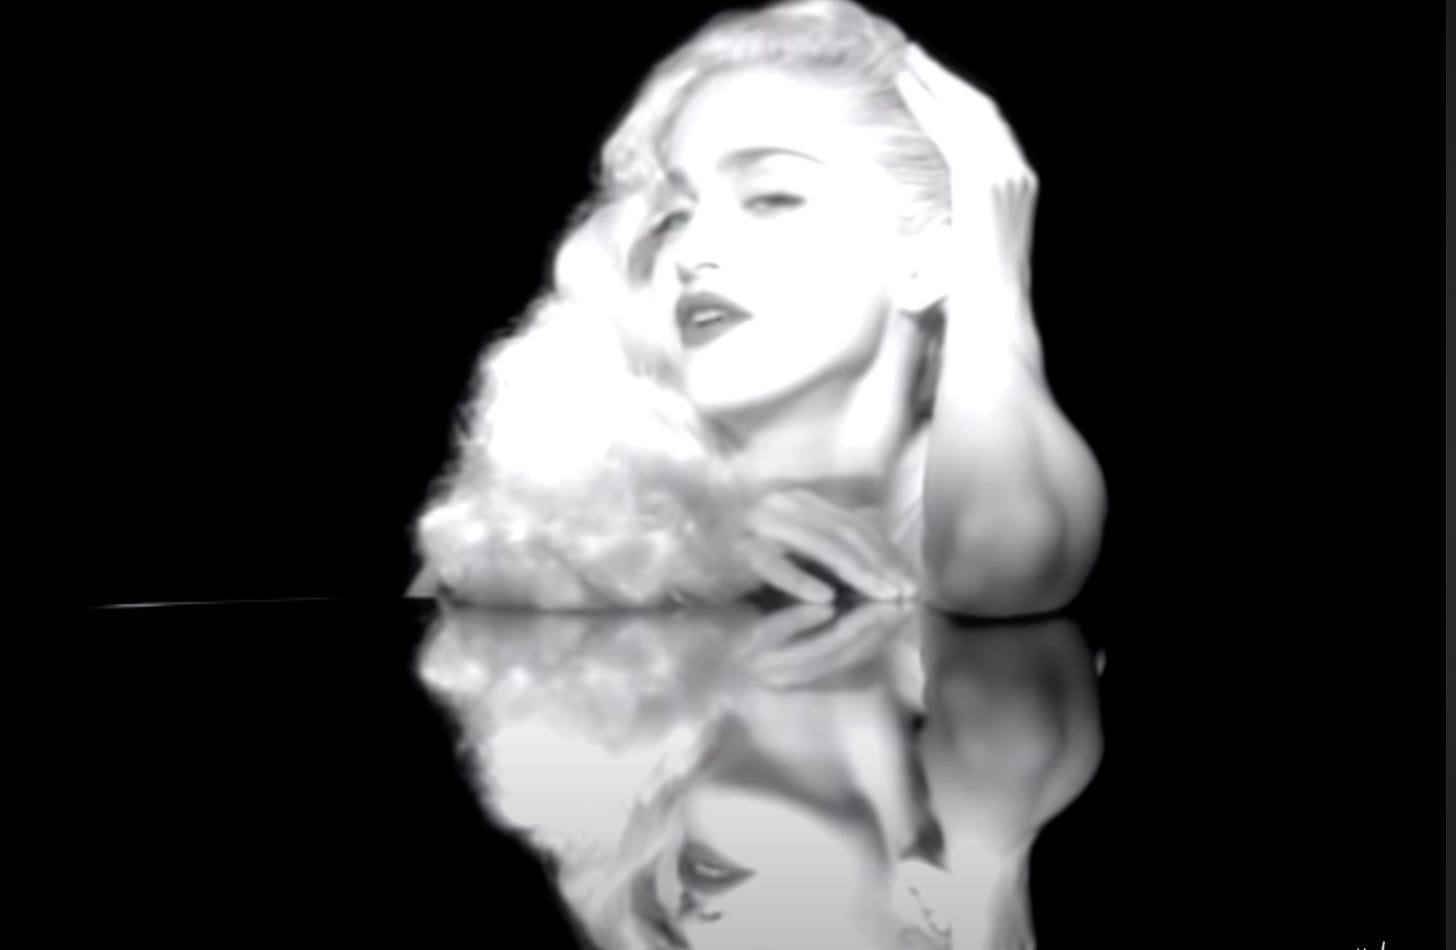 Madonna wears a long hair piece in the Vogue video as she sings over a reflective surface